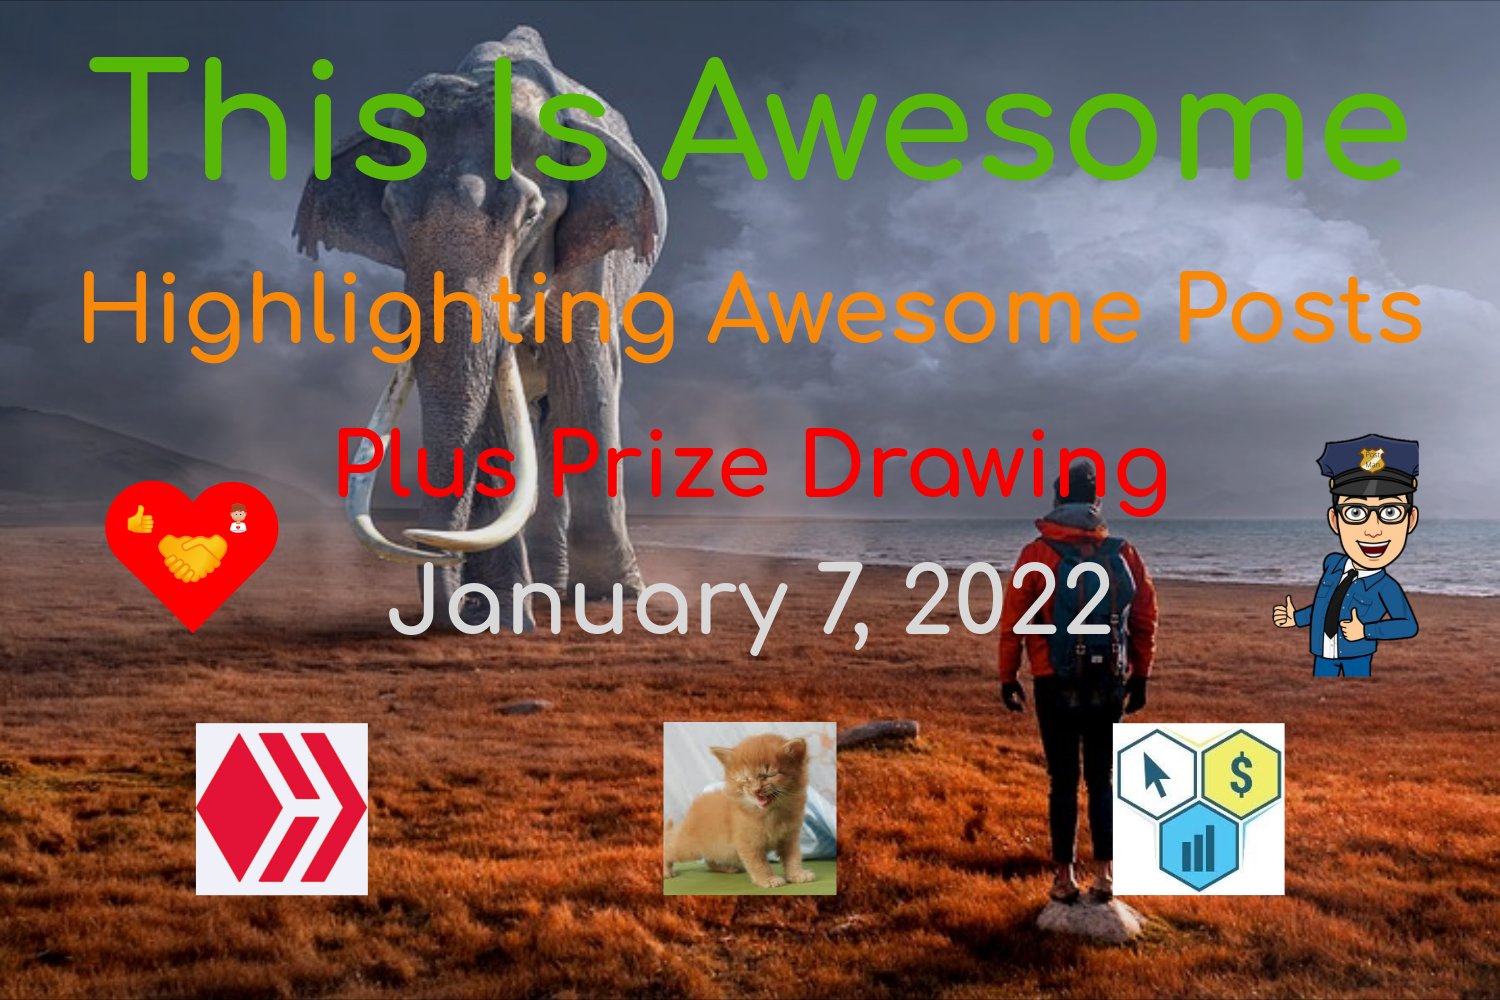 @thisisawesome/this-is-awesome-highlighting-awesome-posts-plus-prize-drawing-january-7-2022